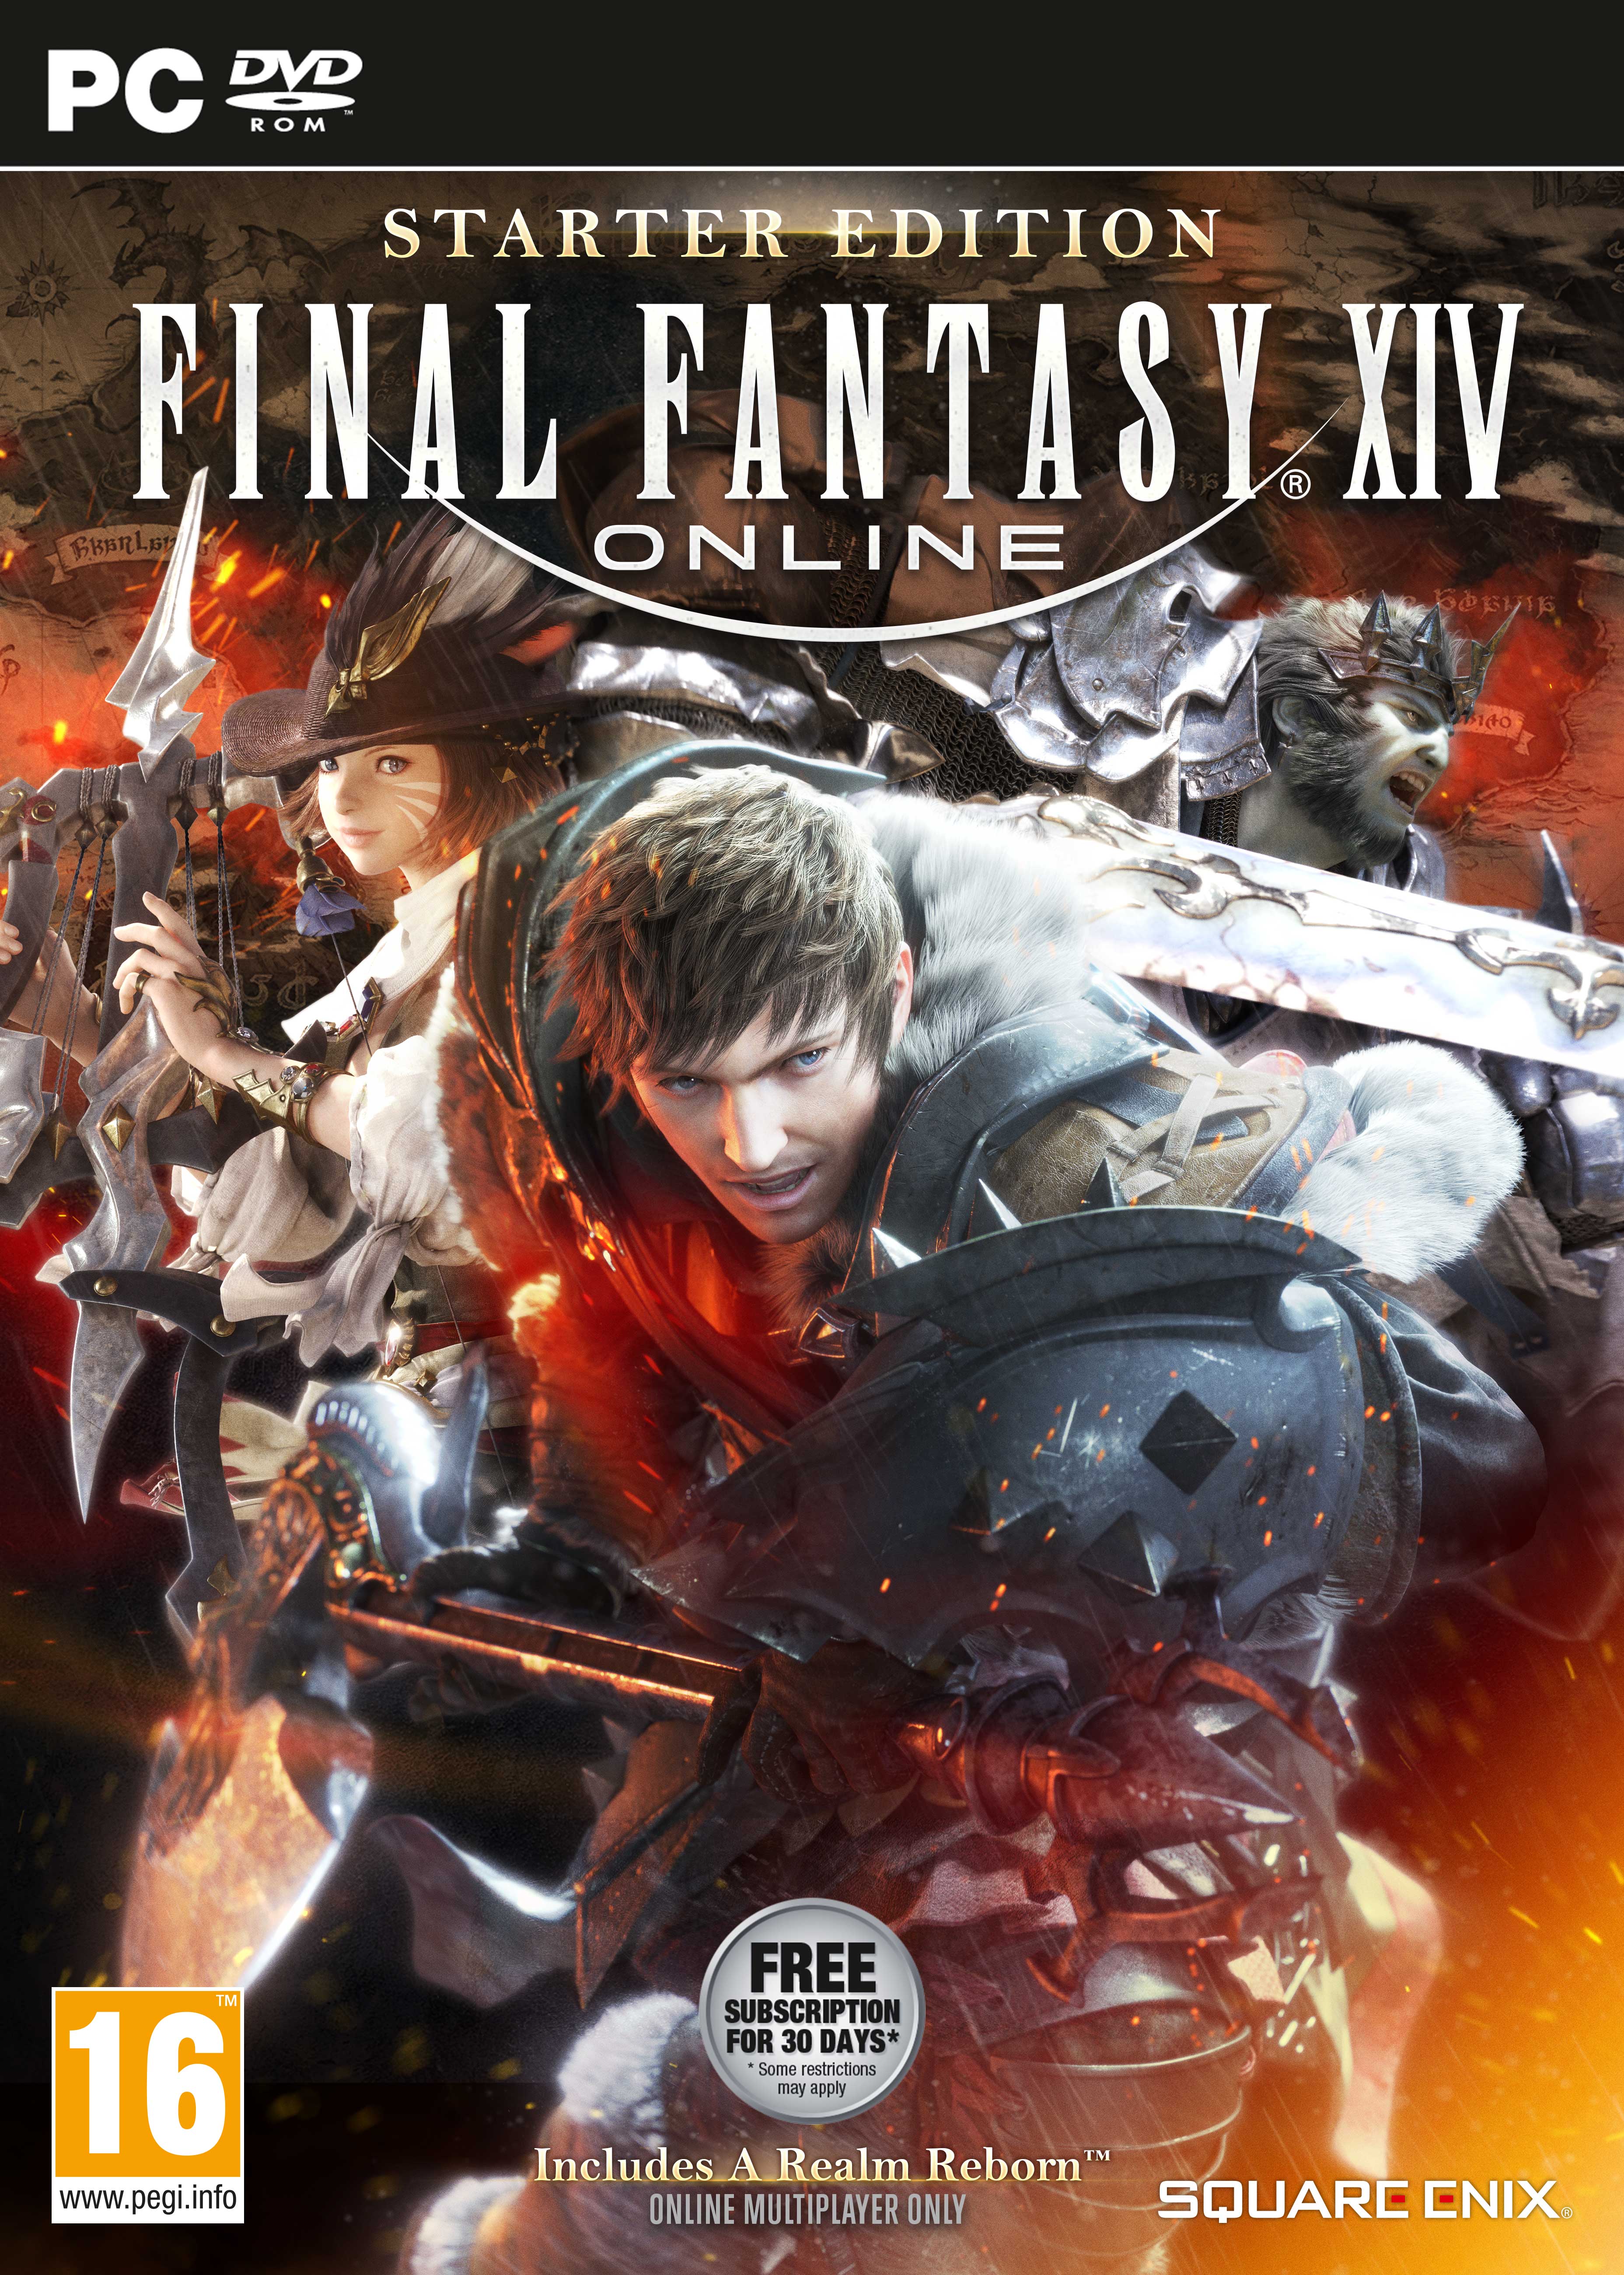 where to buy final fantasy xiv online